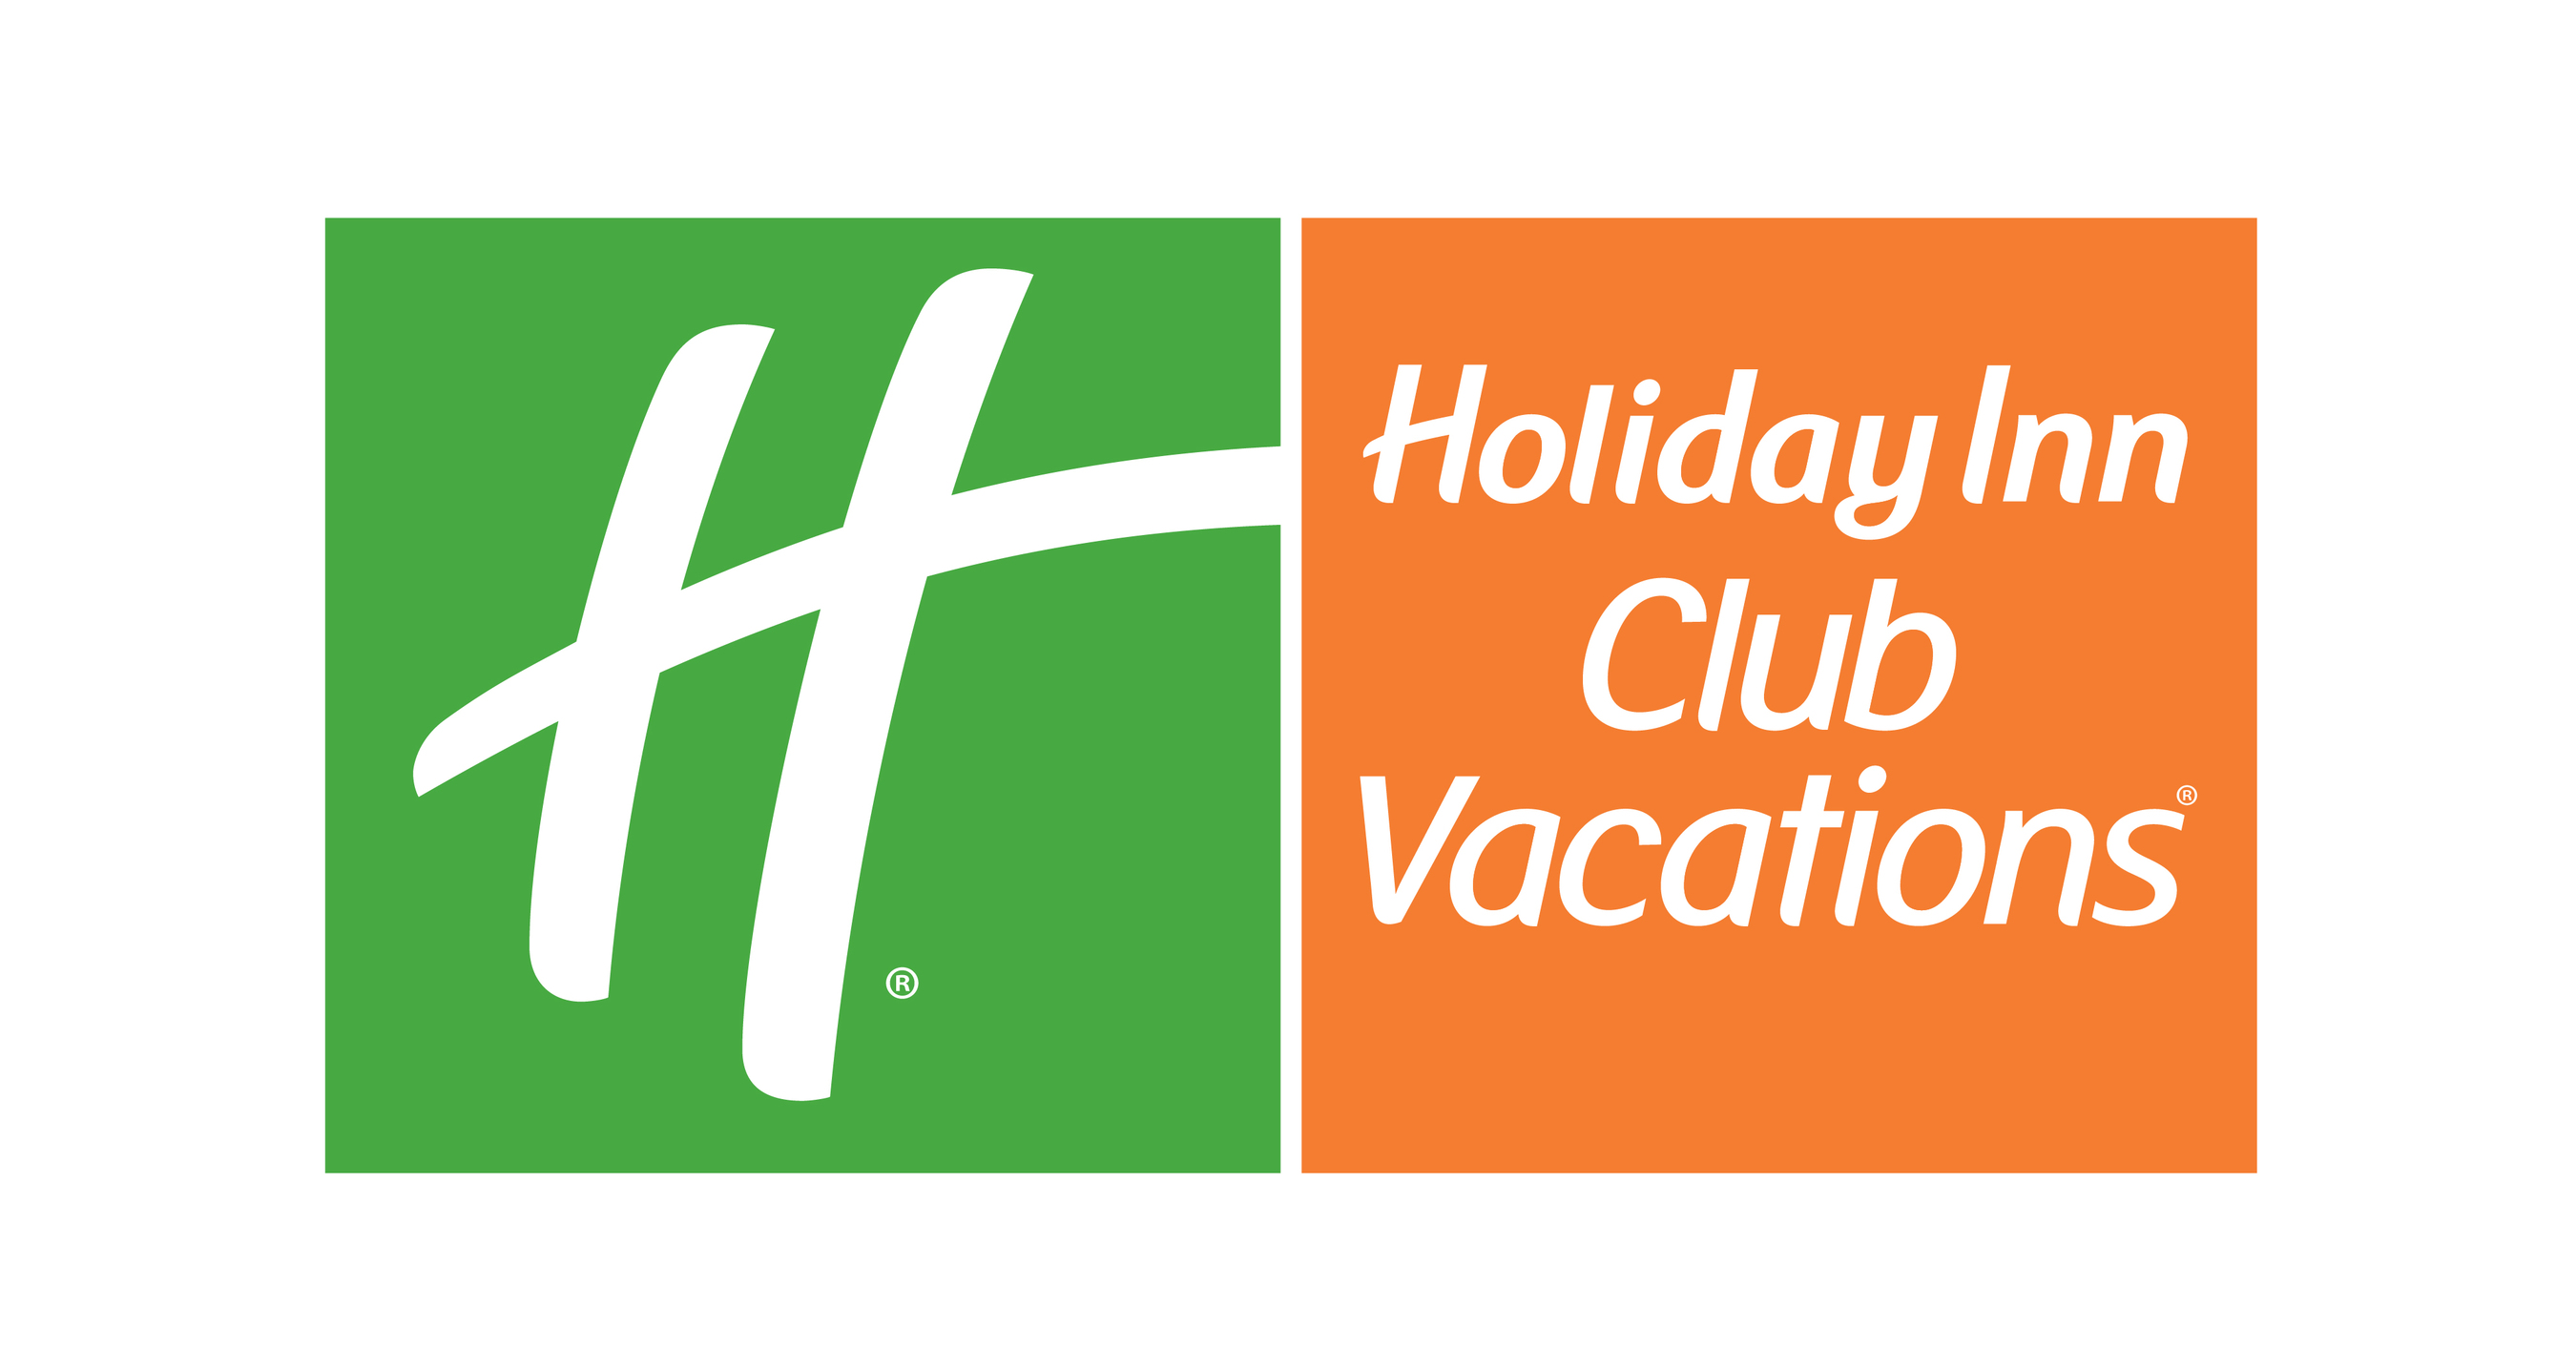 Holiday Inn Club Vacations Acquires Land to Develop Oceanfront Resort in Myrtle Beach